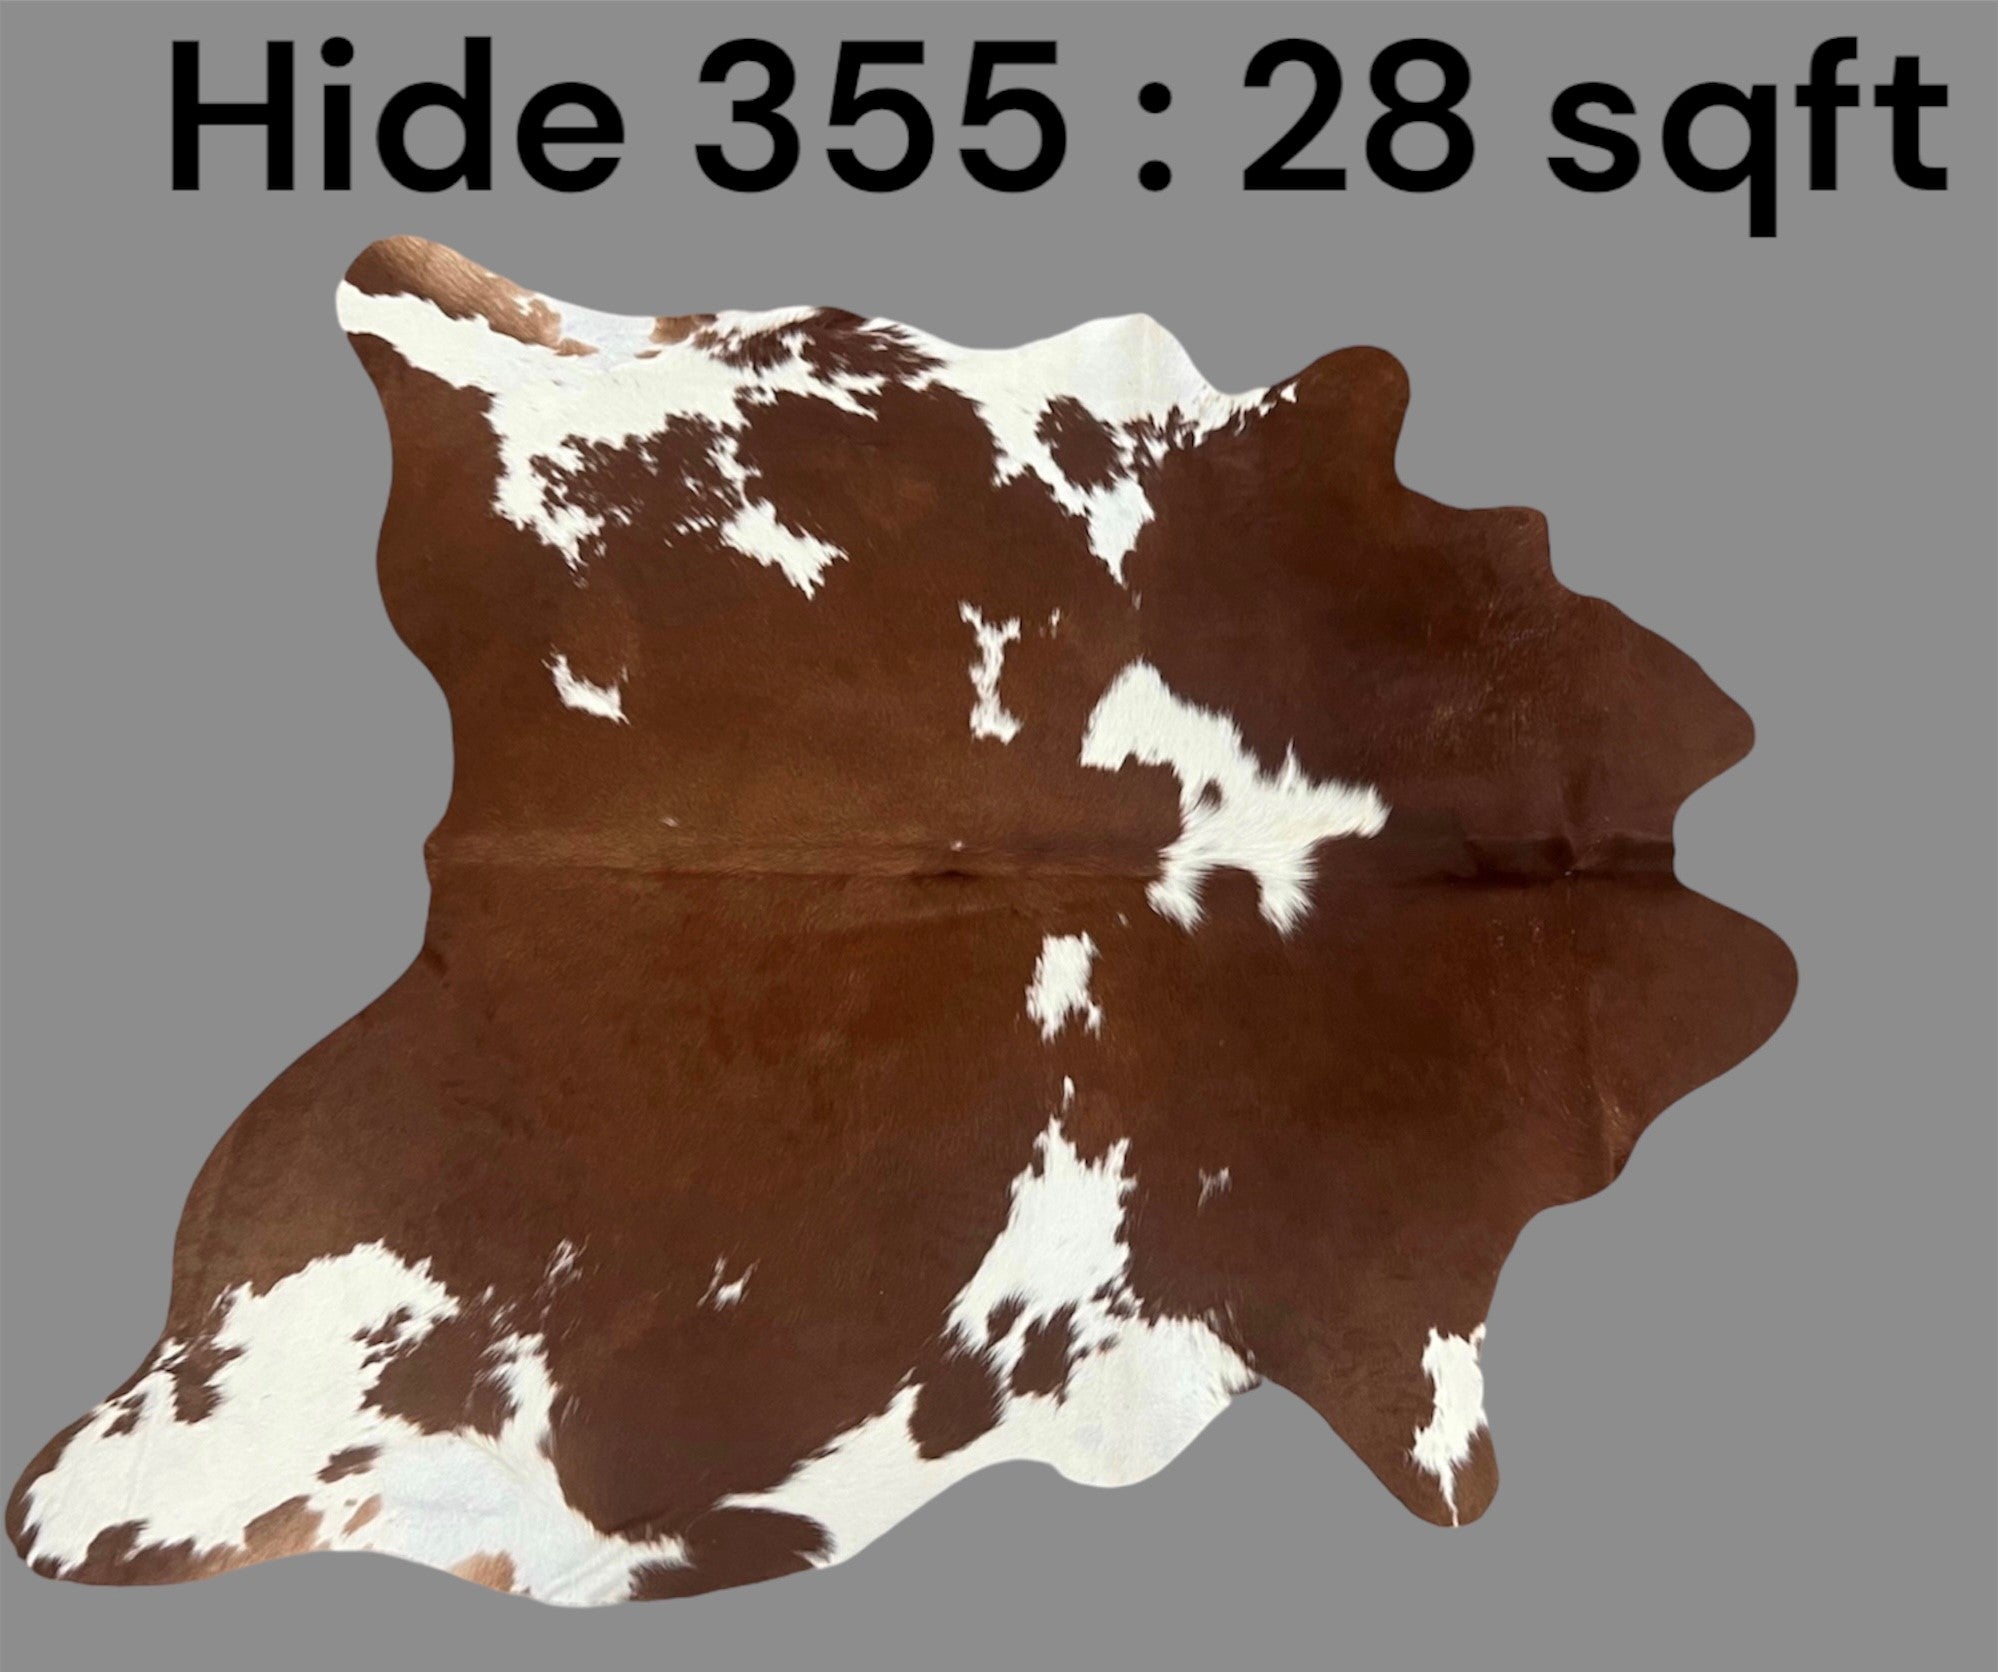 Natural Hair On Cow Hide : This Hide Is Perfect For Wall Hanging, Leather Rugs, Leather Upholstery & Leather Accessories. (Hide355)